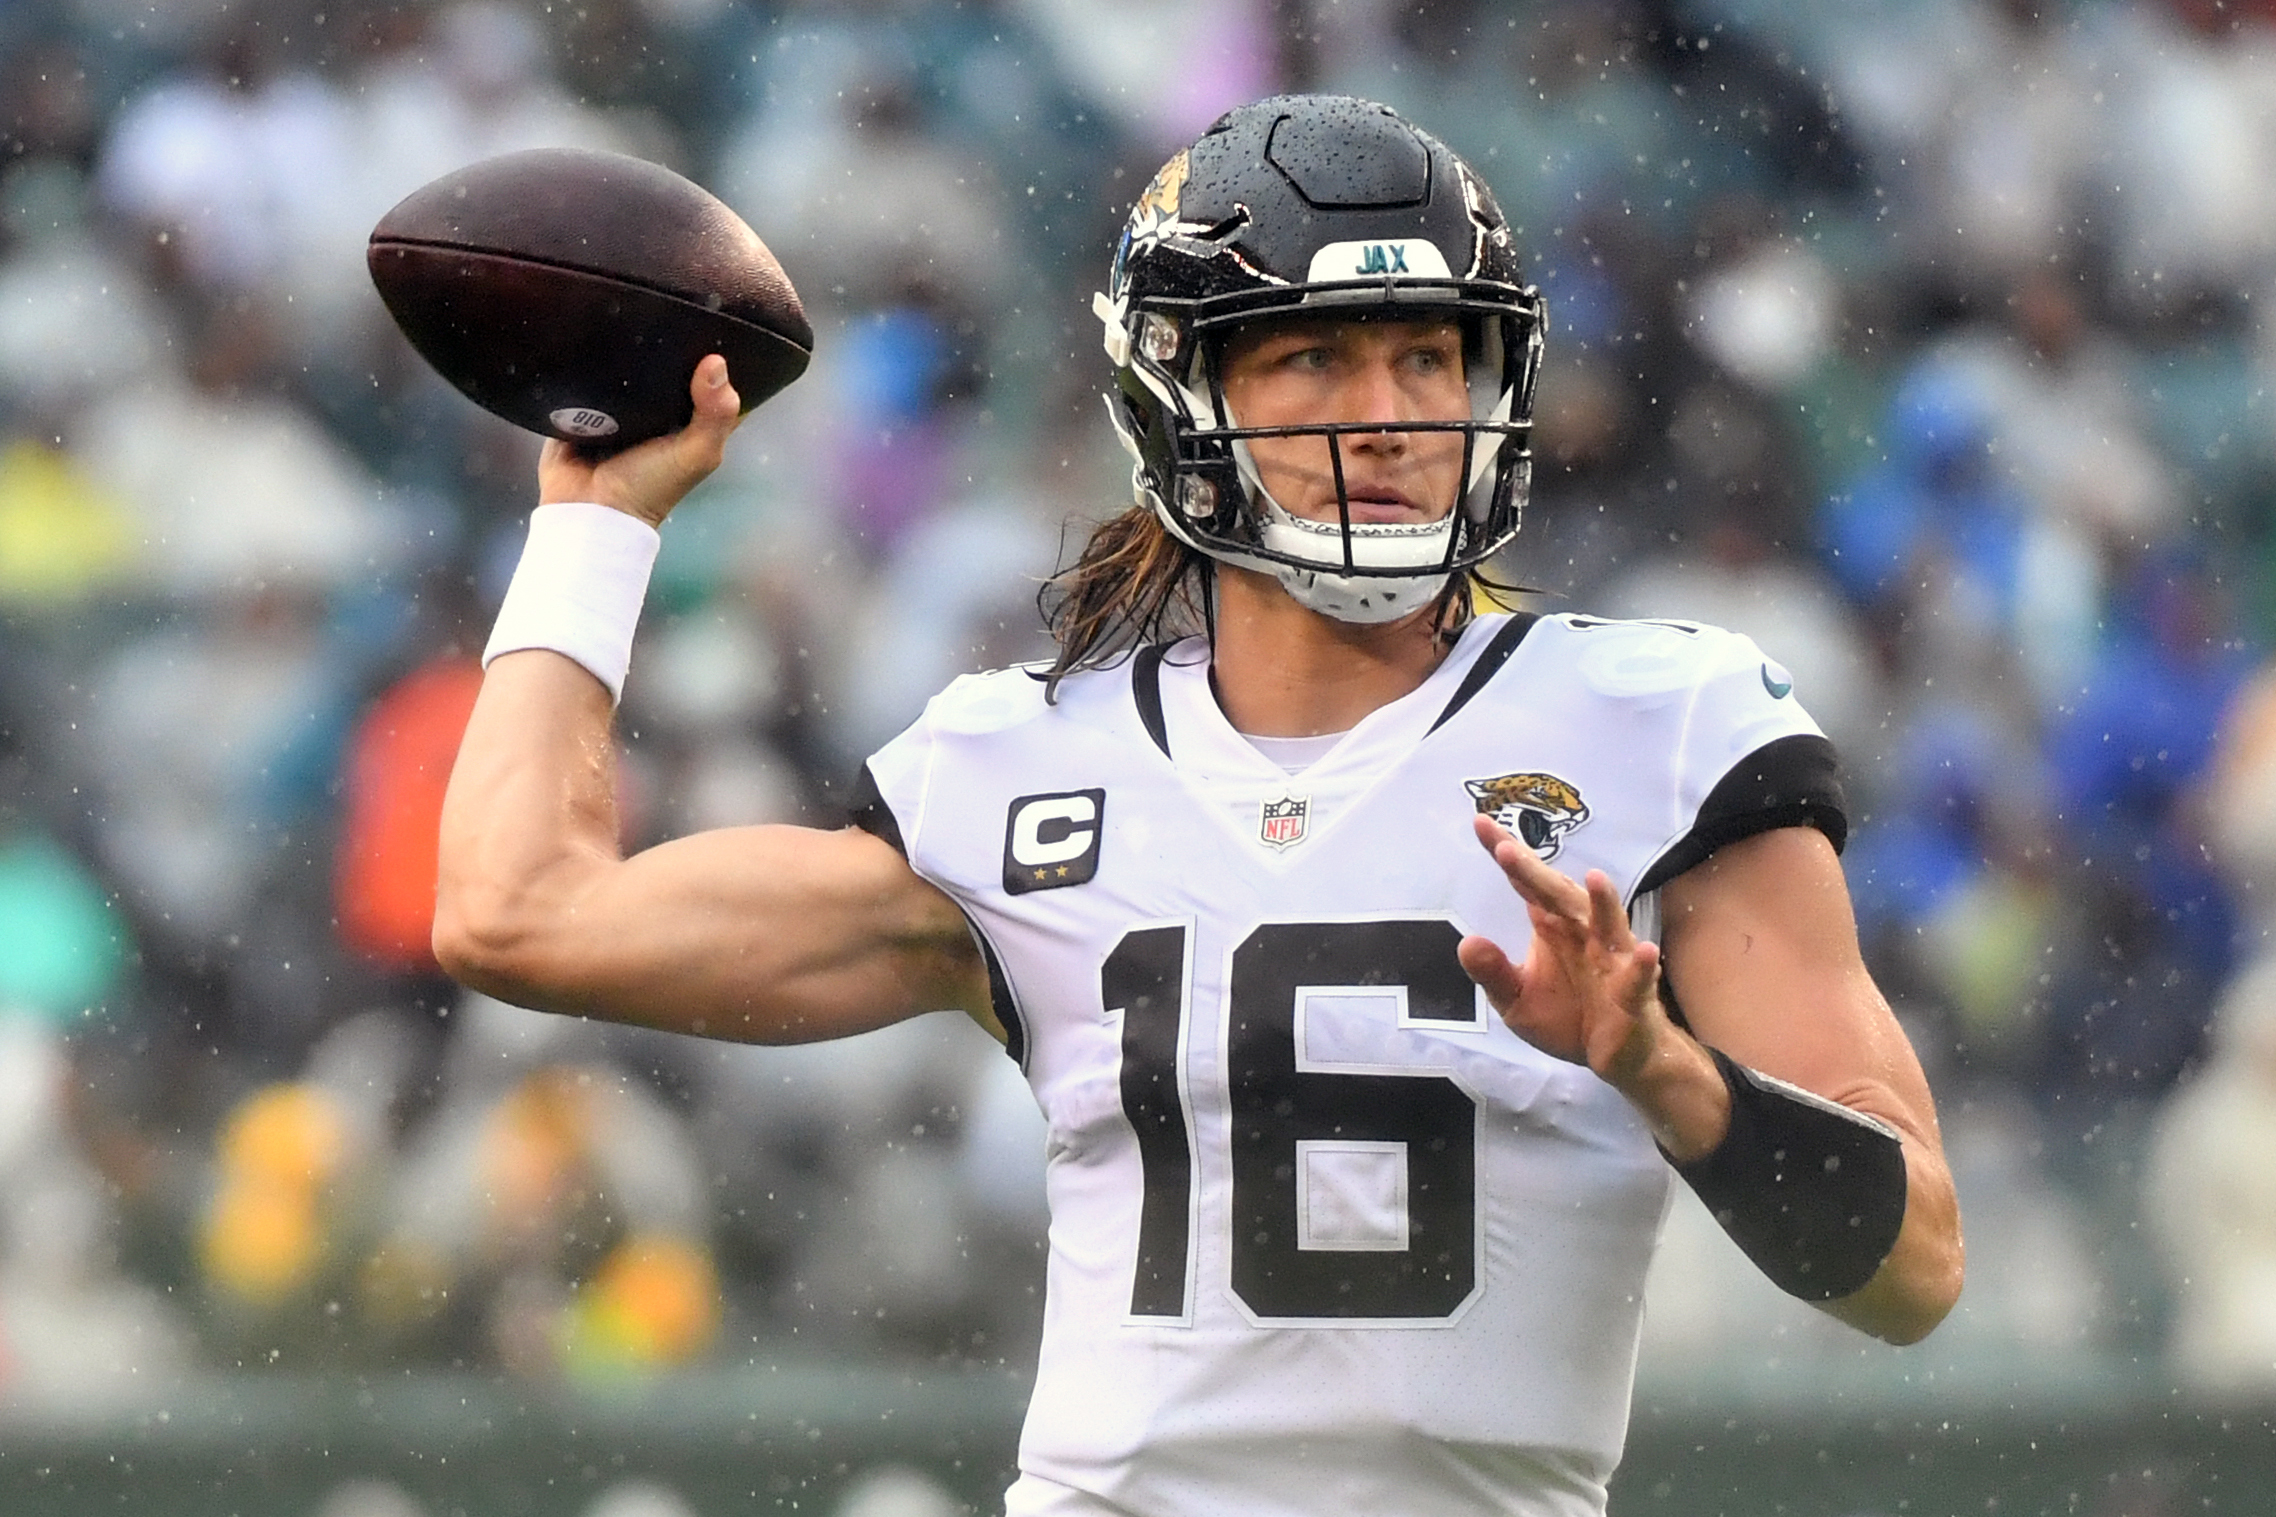 2021 NFL picks, score predictions for Week 2 - Page 3